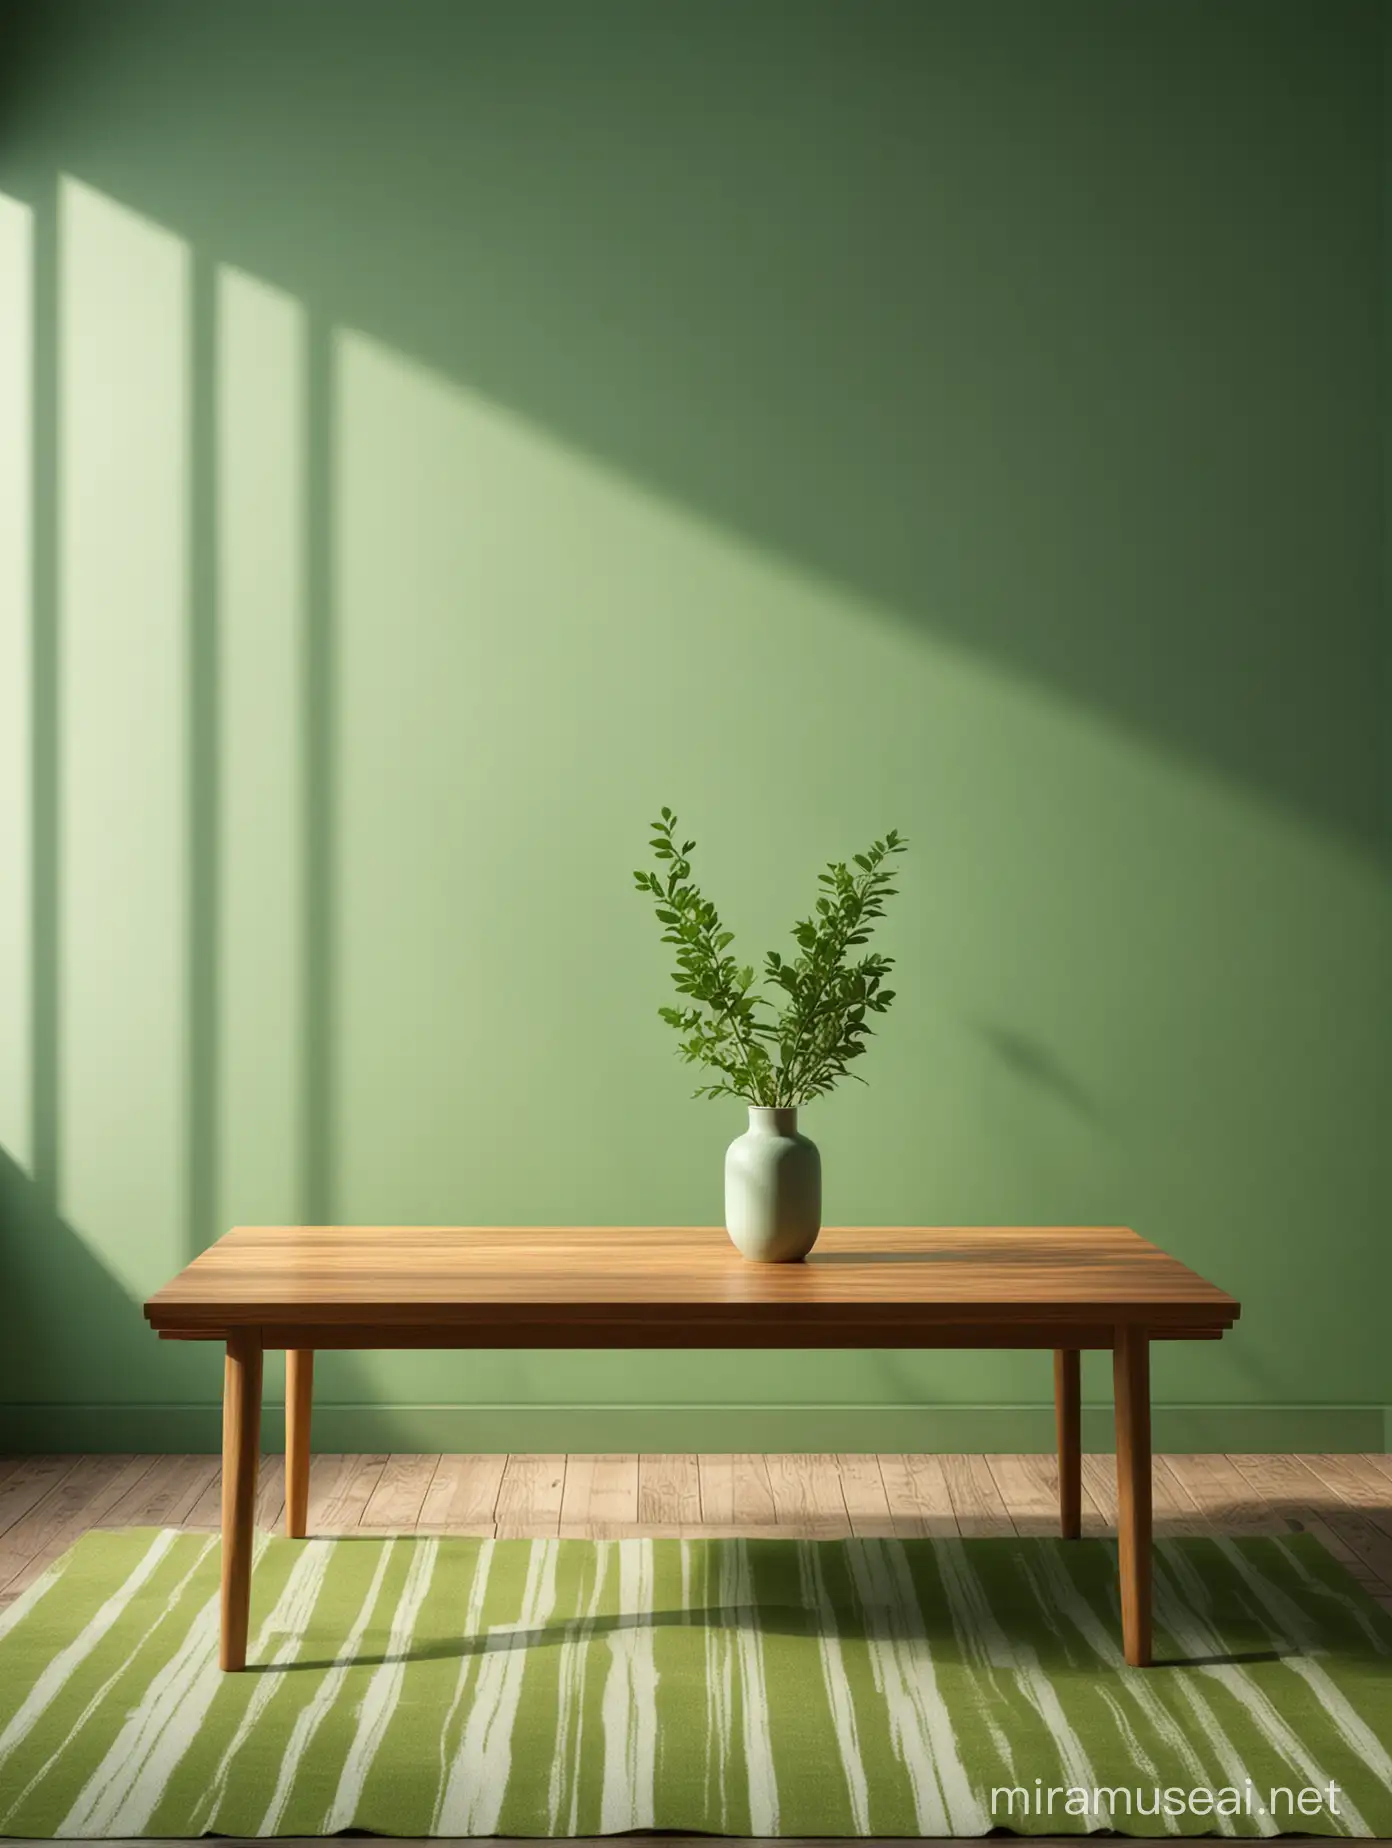 Minimalist Wooden Table with Striped Arrangement on Green Cloth Under Sunrays